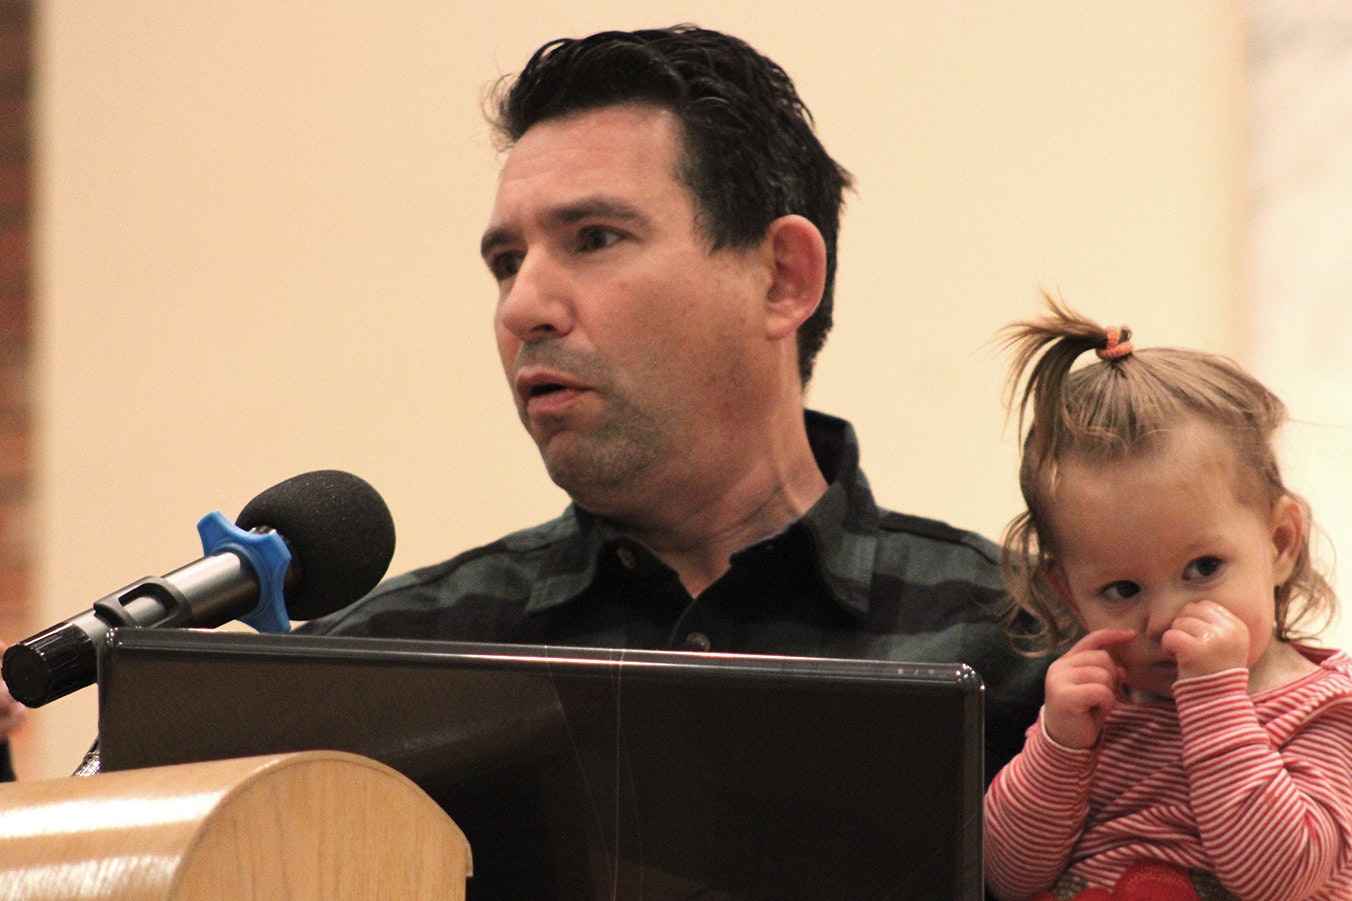 Noam Mantaka, with his young daughter, speaks at a Monday interfaith plea for peace in Cheyenne.